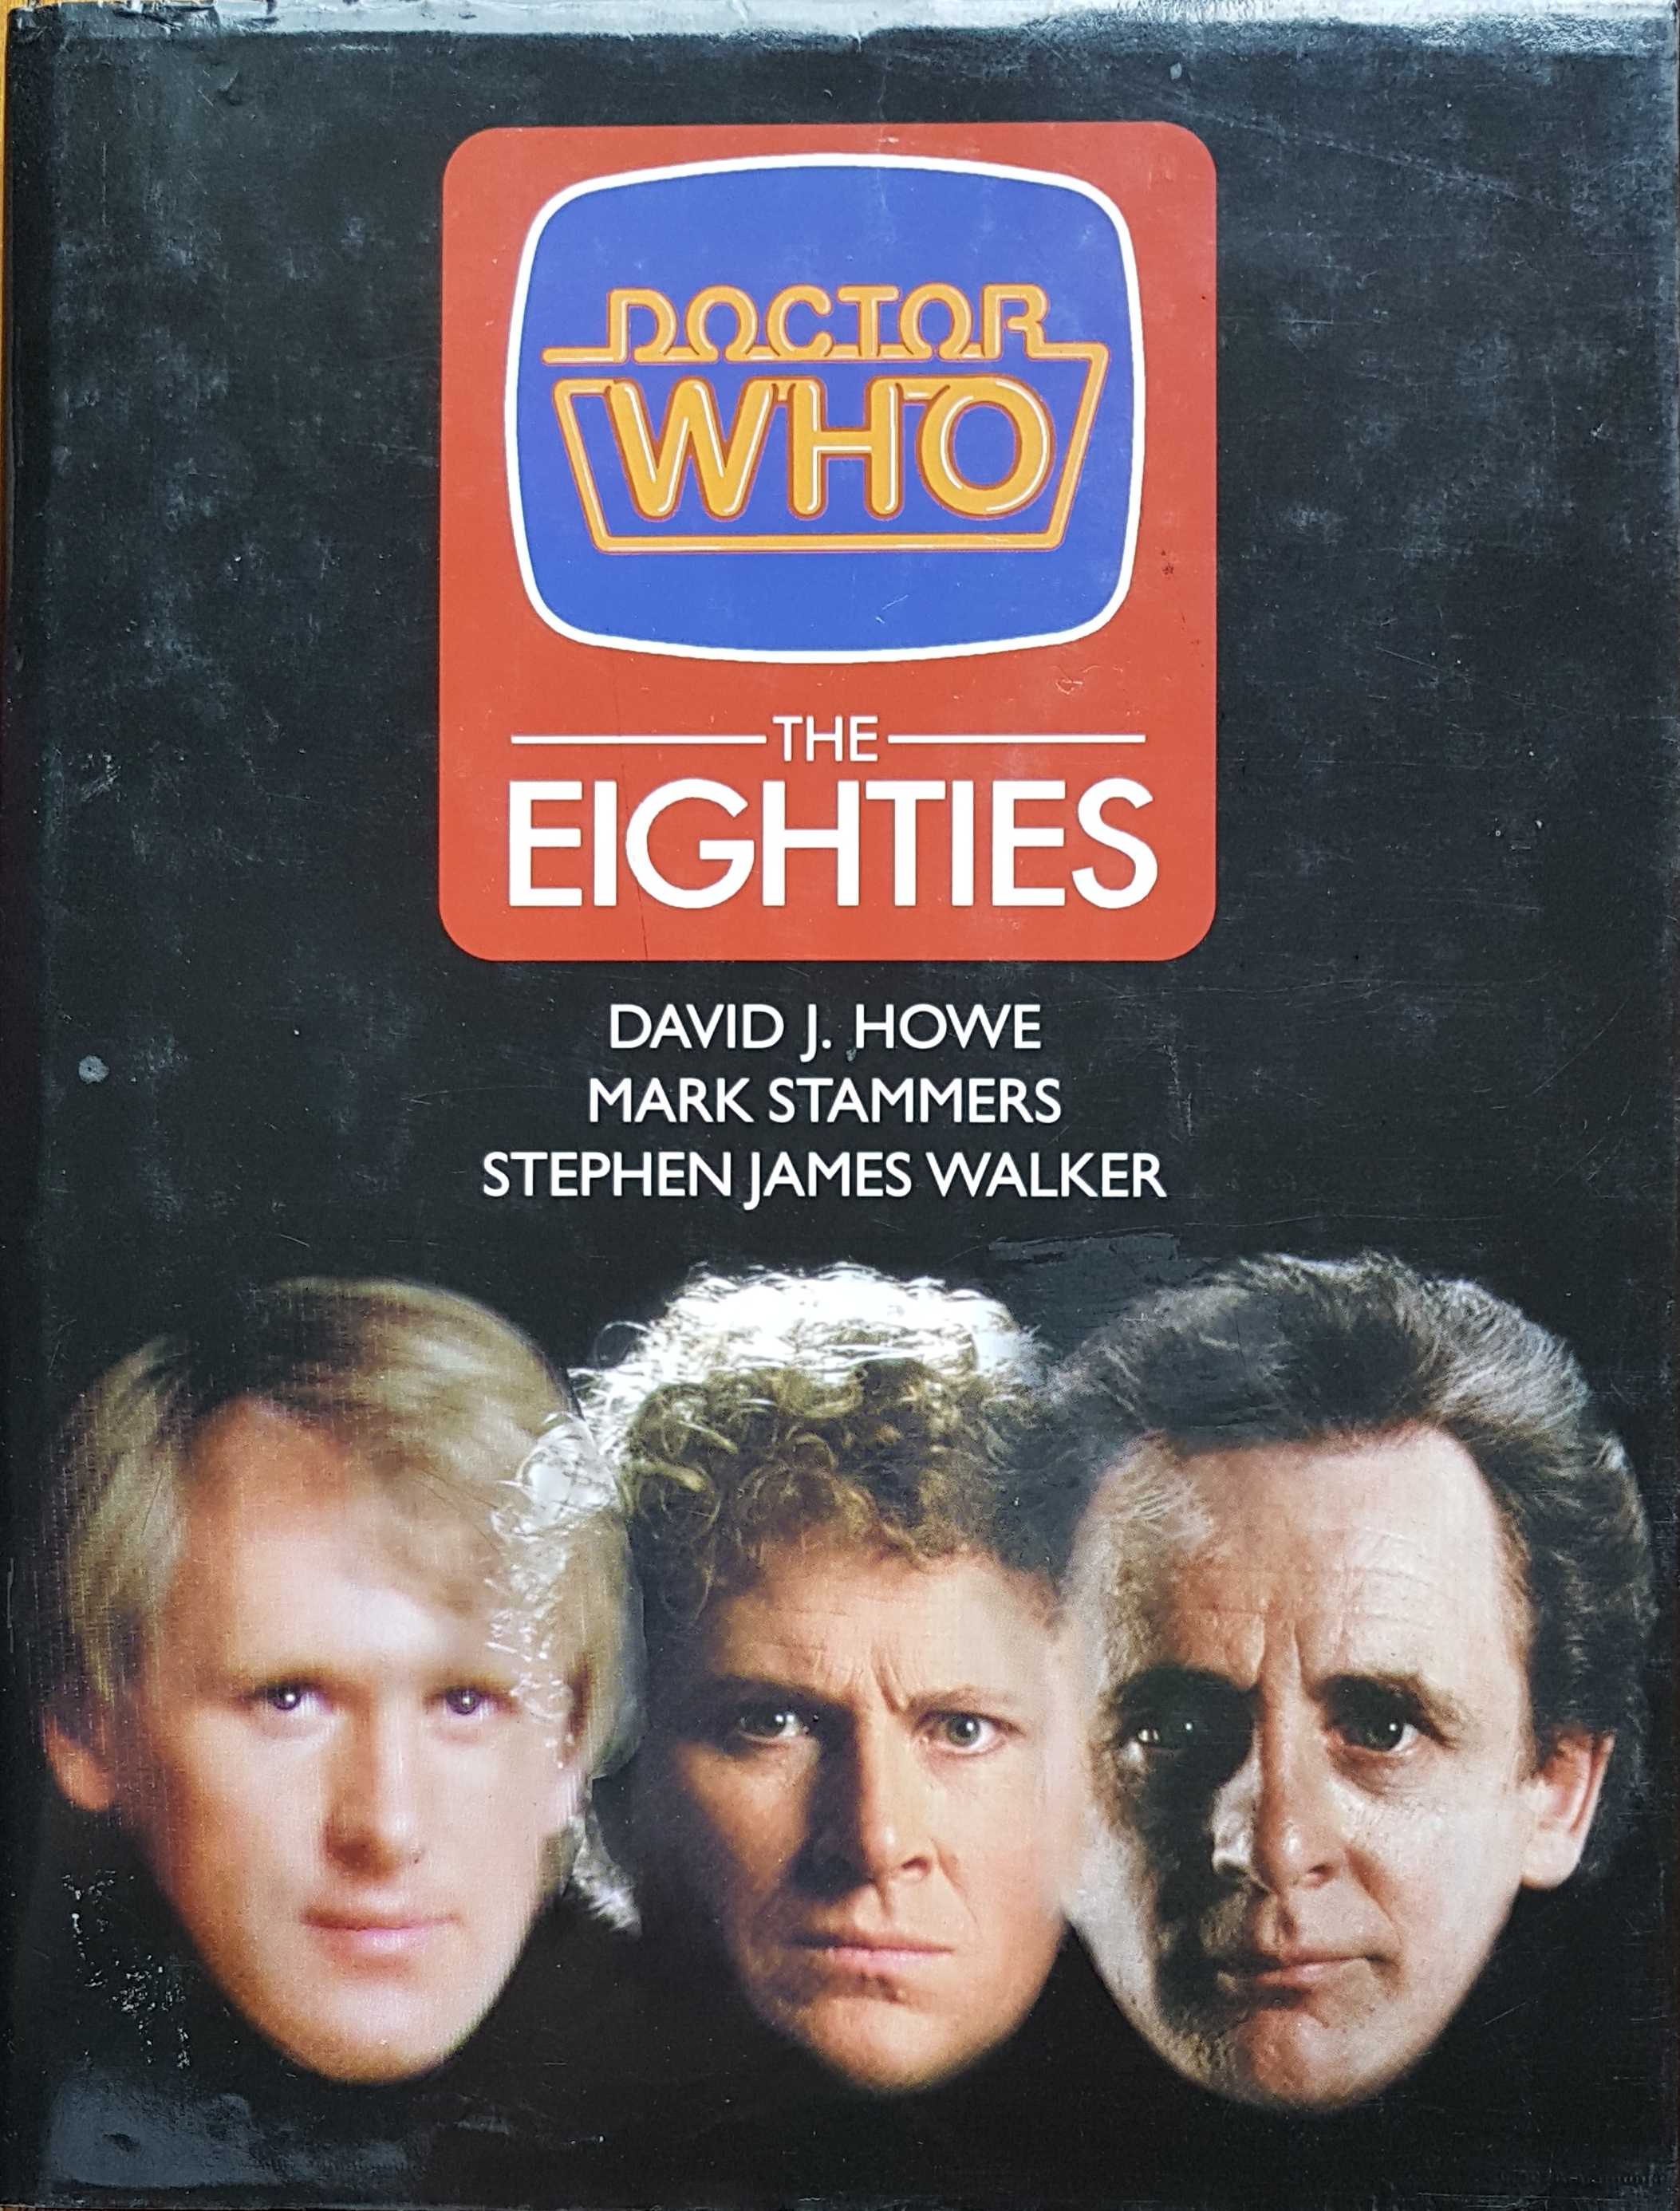 Picture of 1-85227-680-0 Doctor Who - The eighties by artist David J. Howe / Mark Stammers / Stephen James Walker from the BBC records and Tapes library